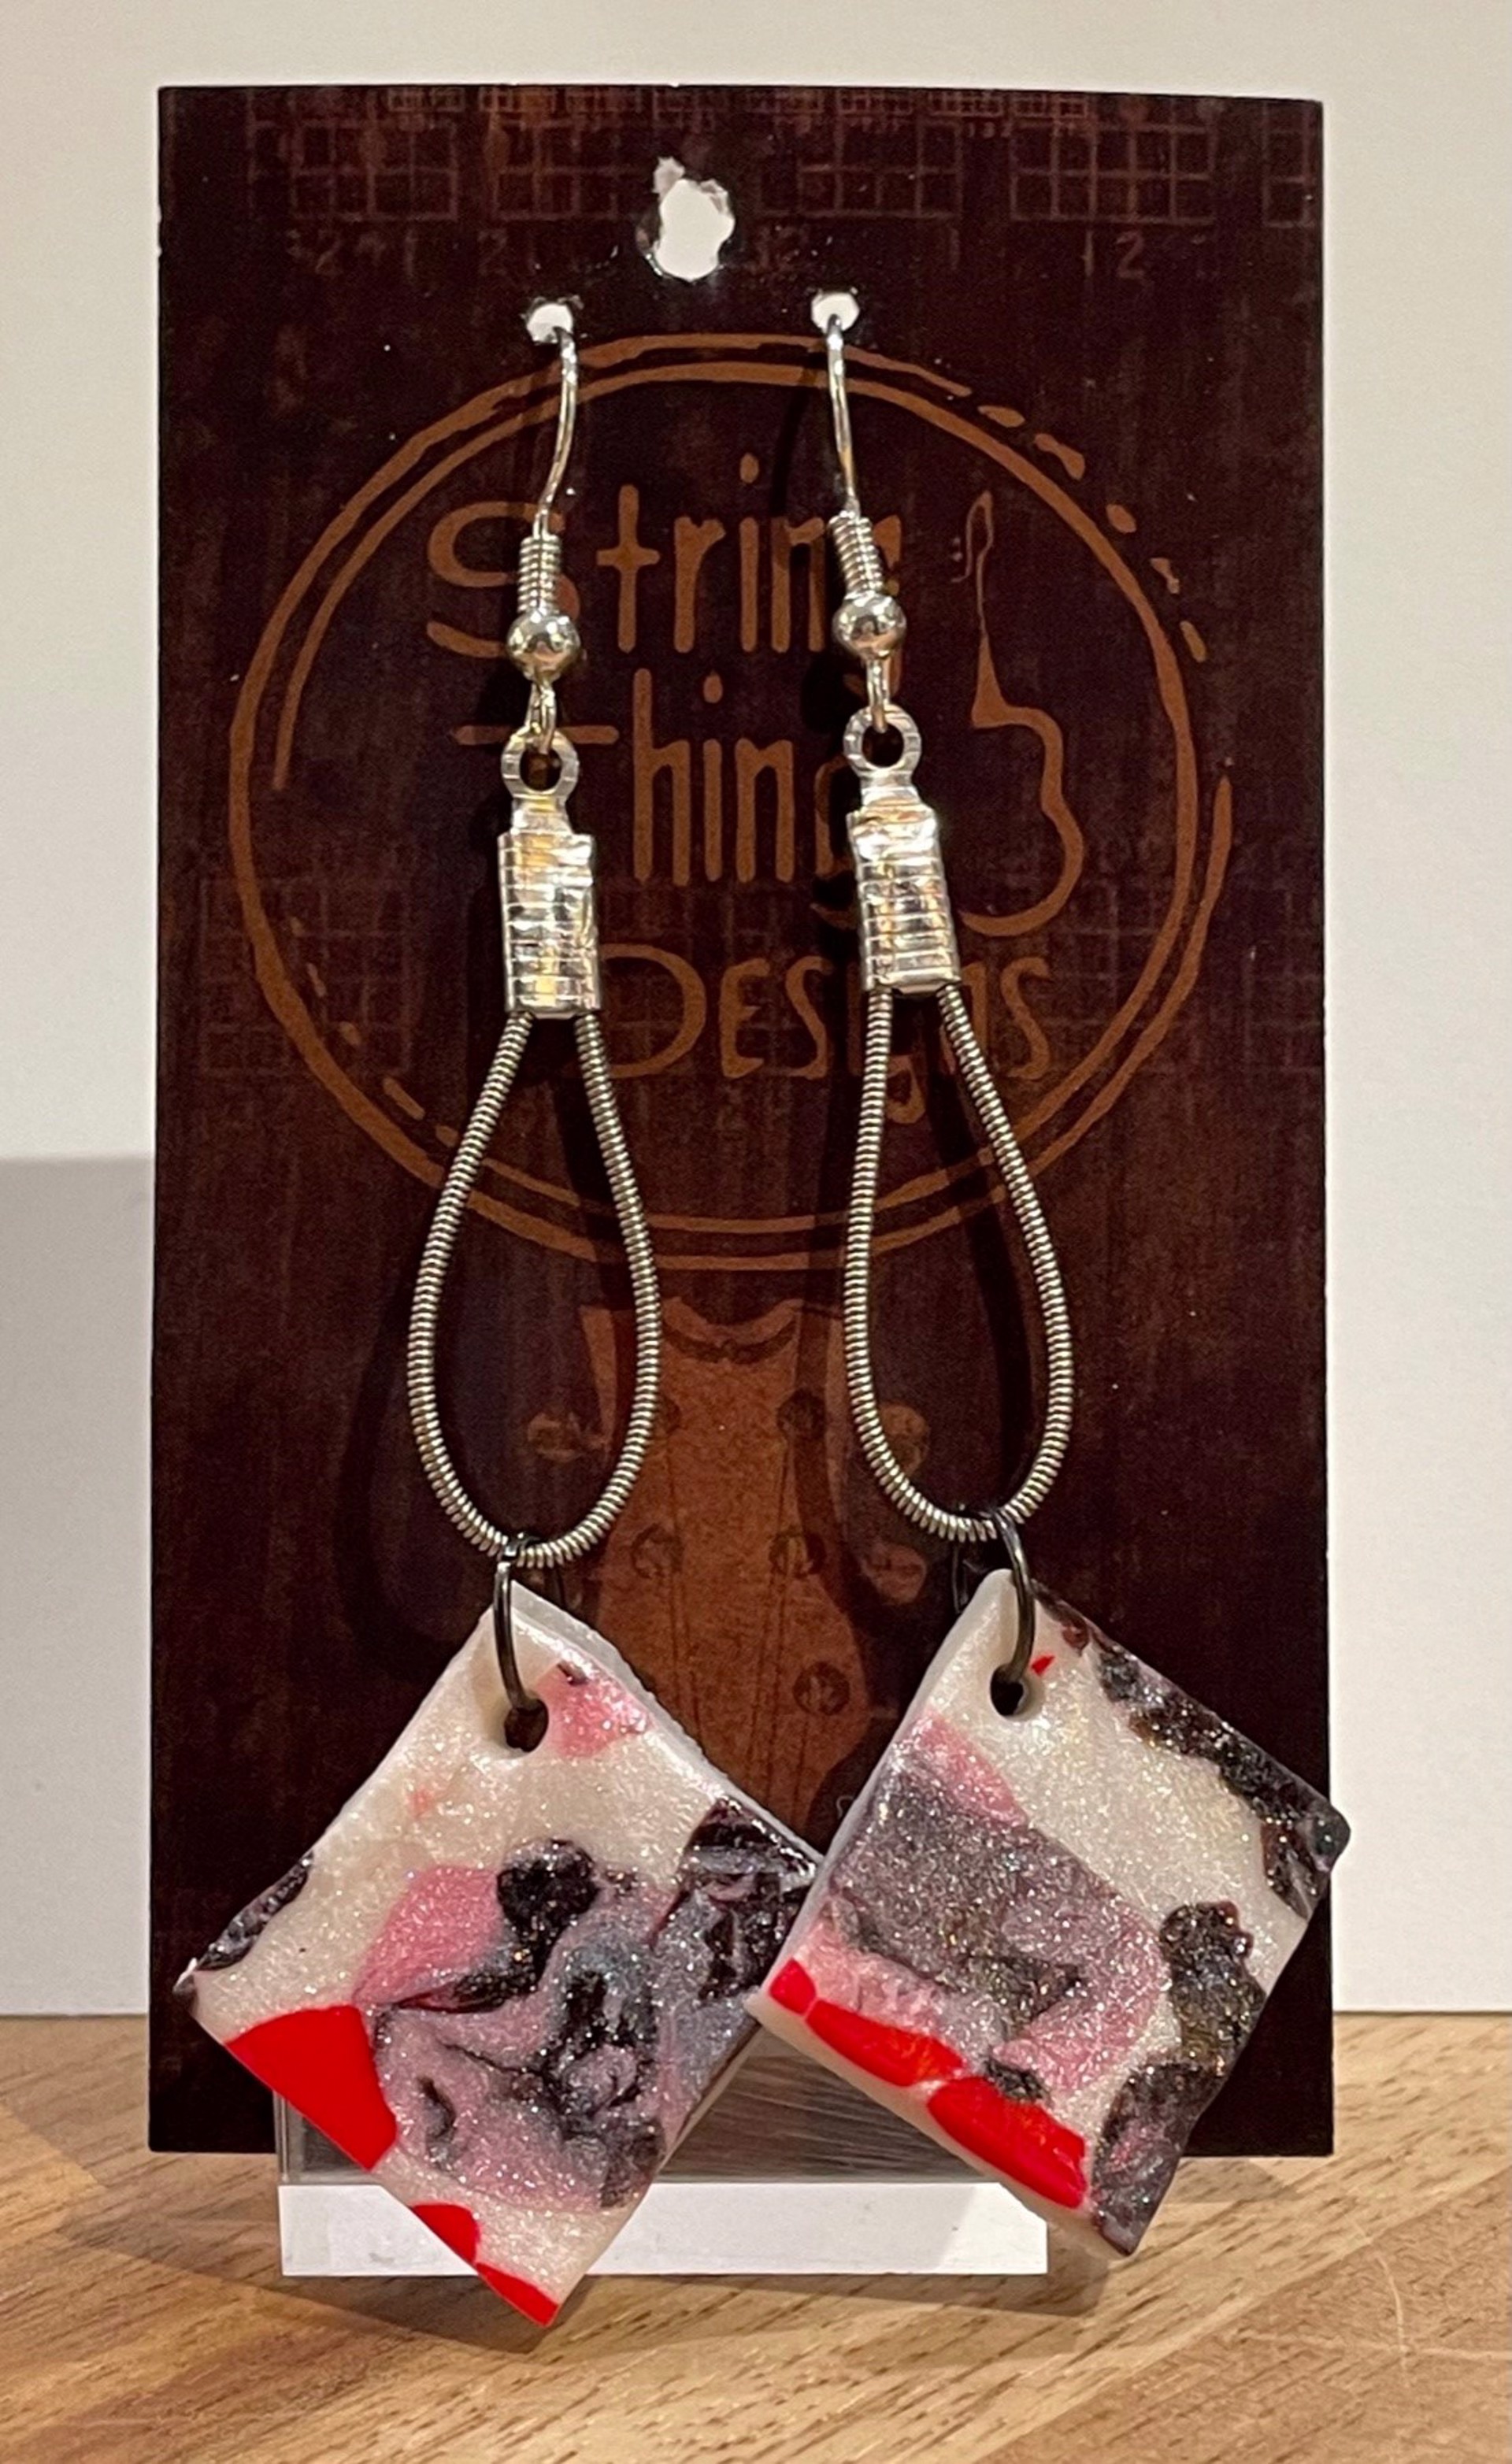 Red/White/Black Diamond Guitar String Earrings by String Thing Designs